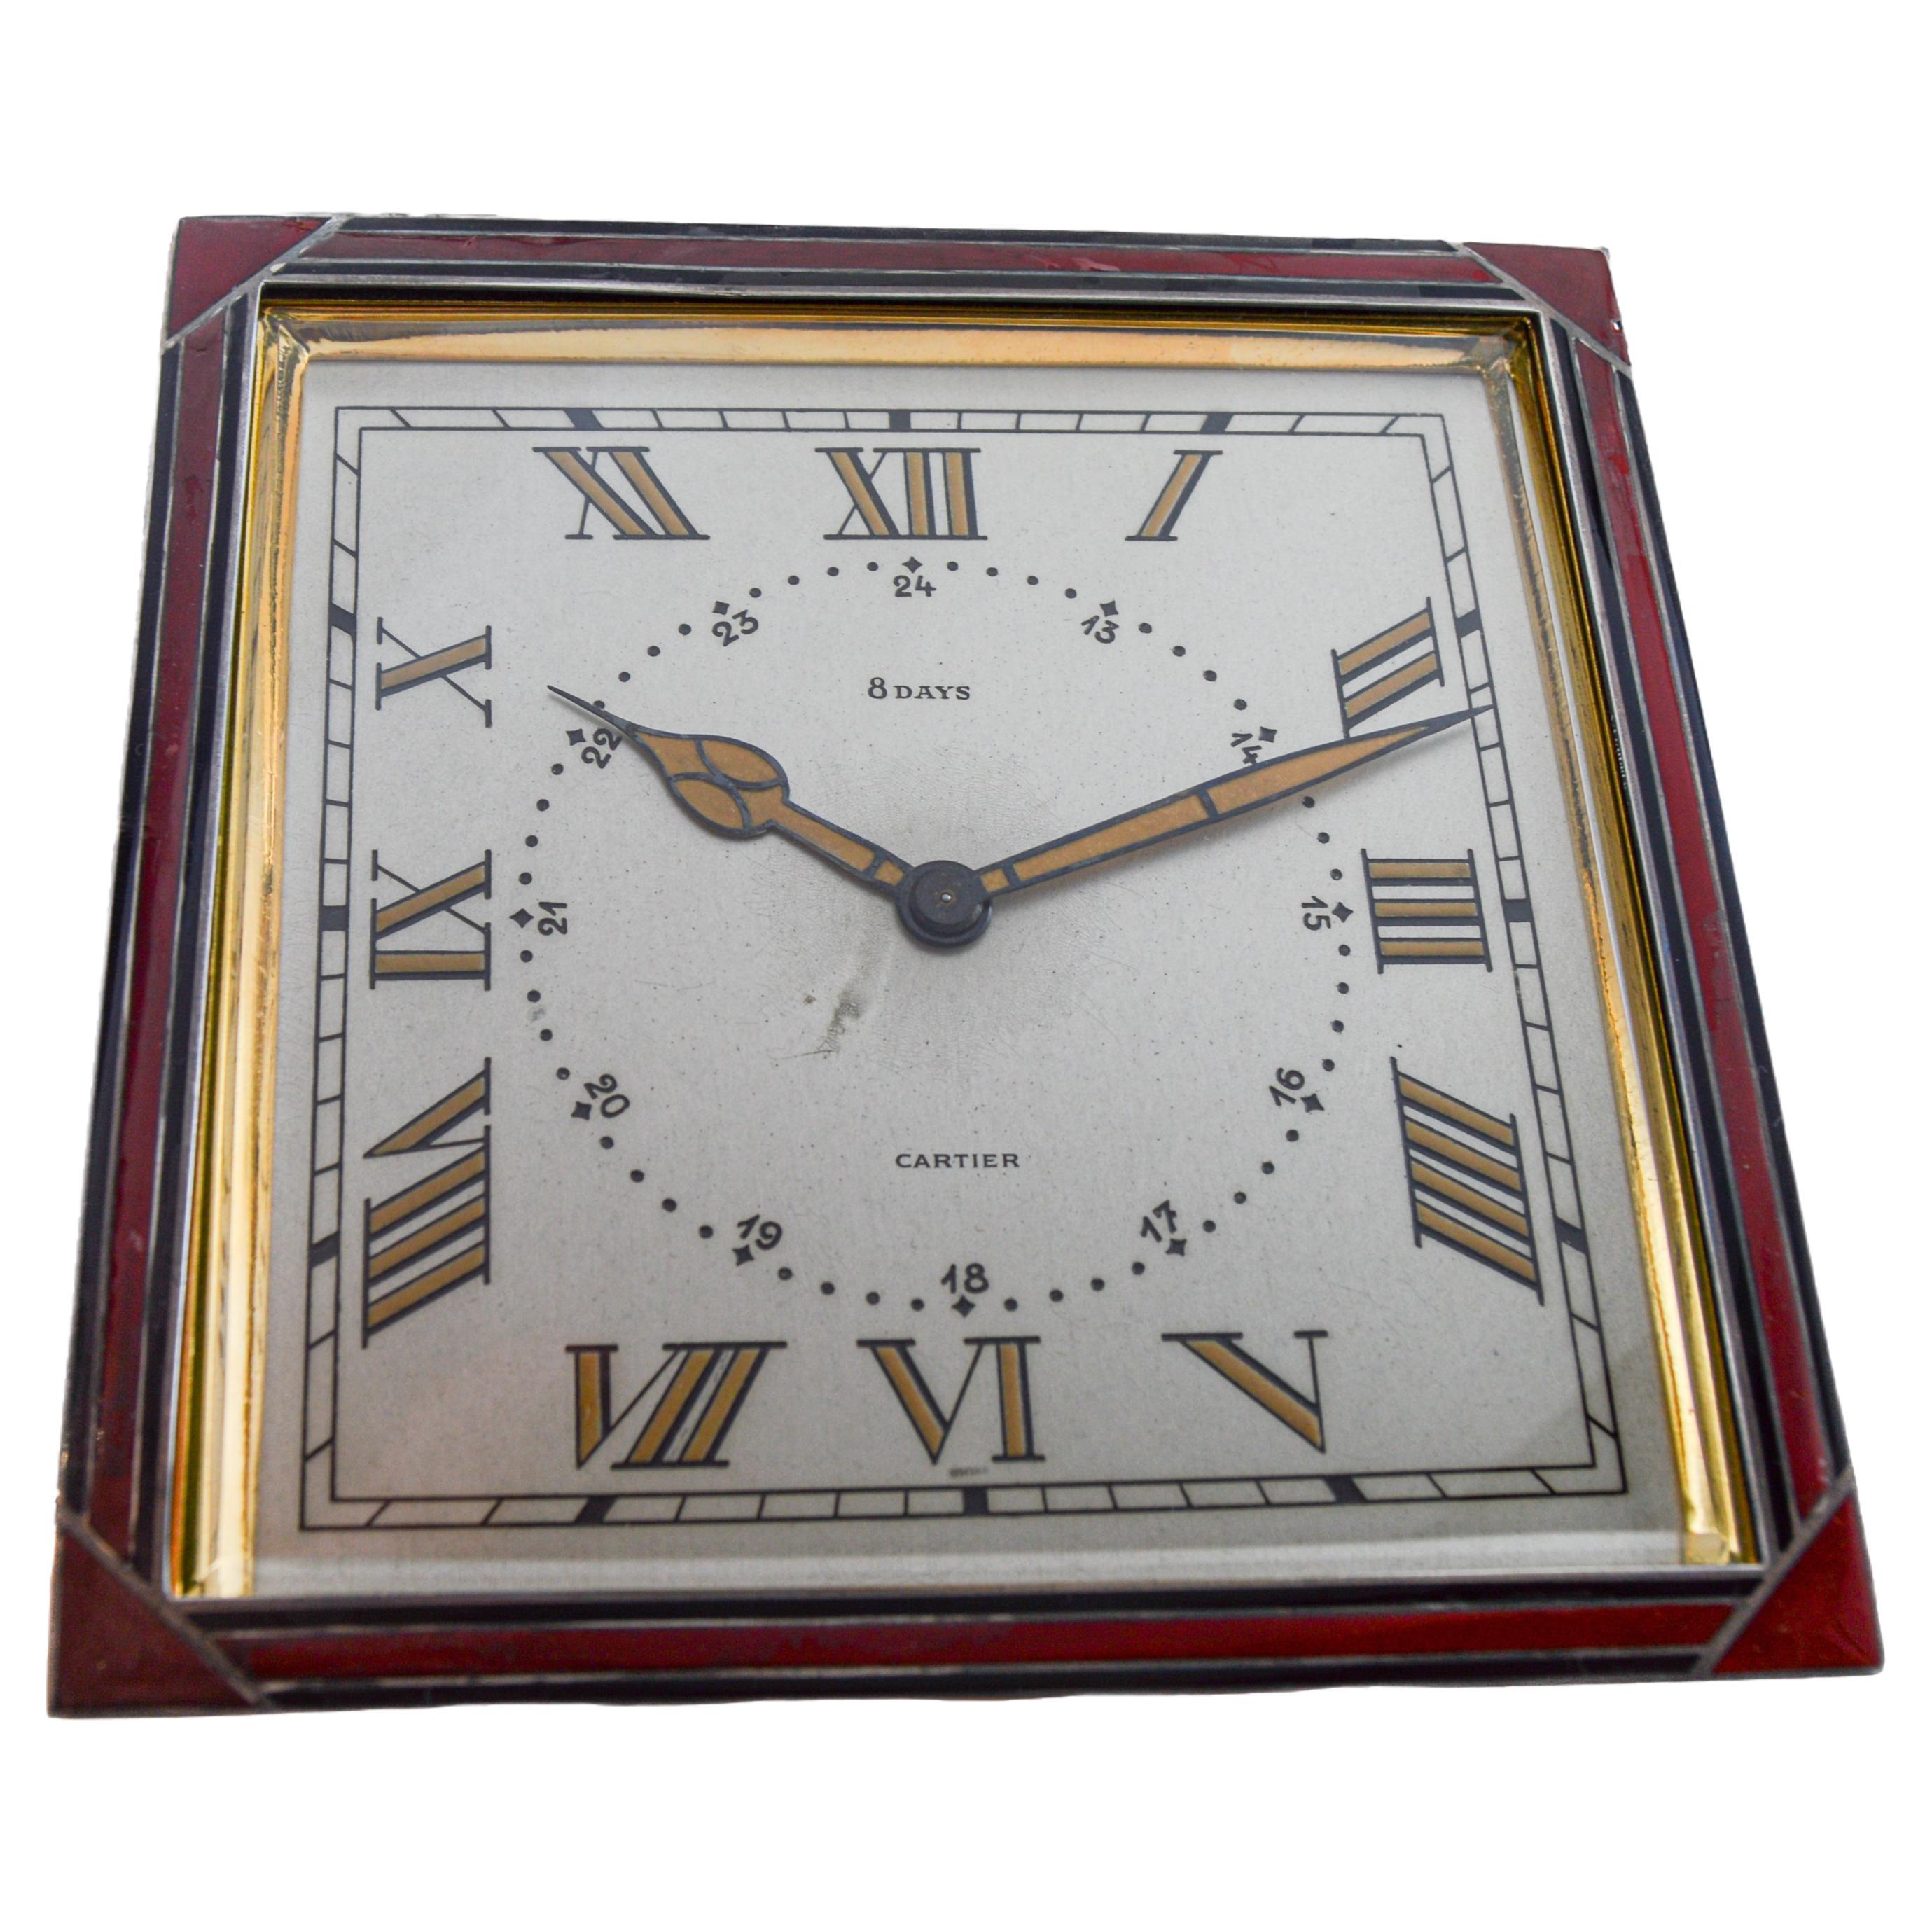 Cartier Sterling and Enamel Art Deco Desk Clock with Breguet Engine Turned Dial For Sale 6